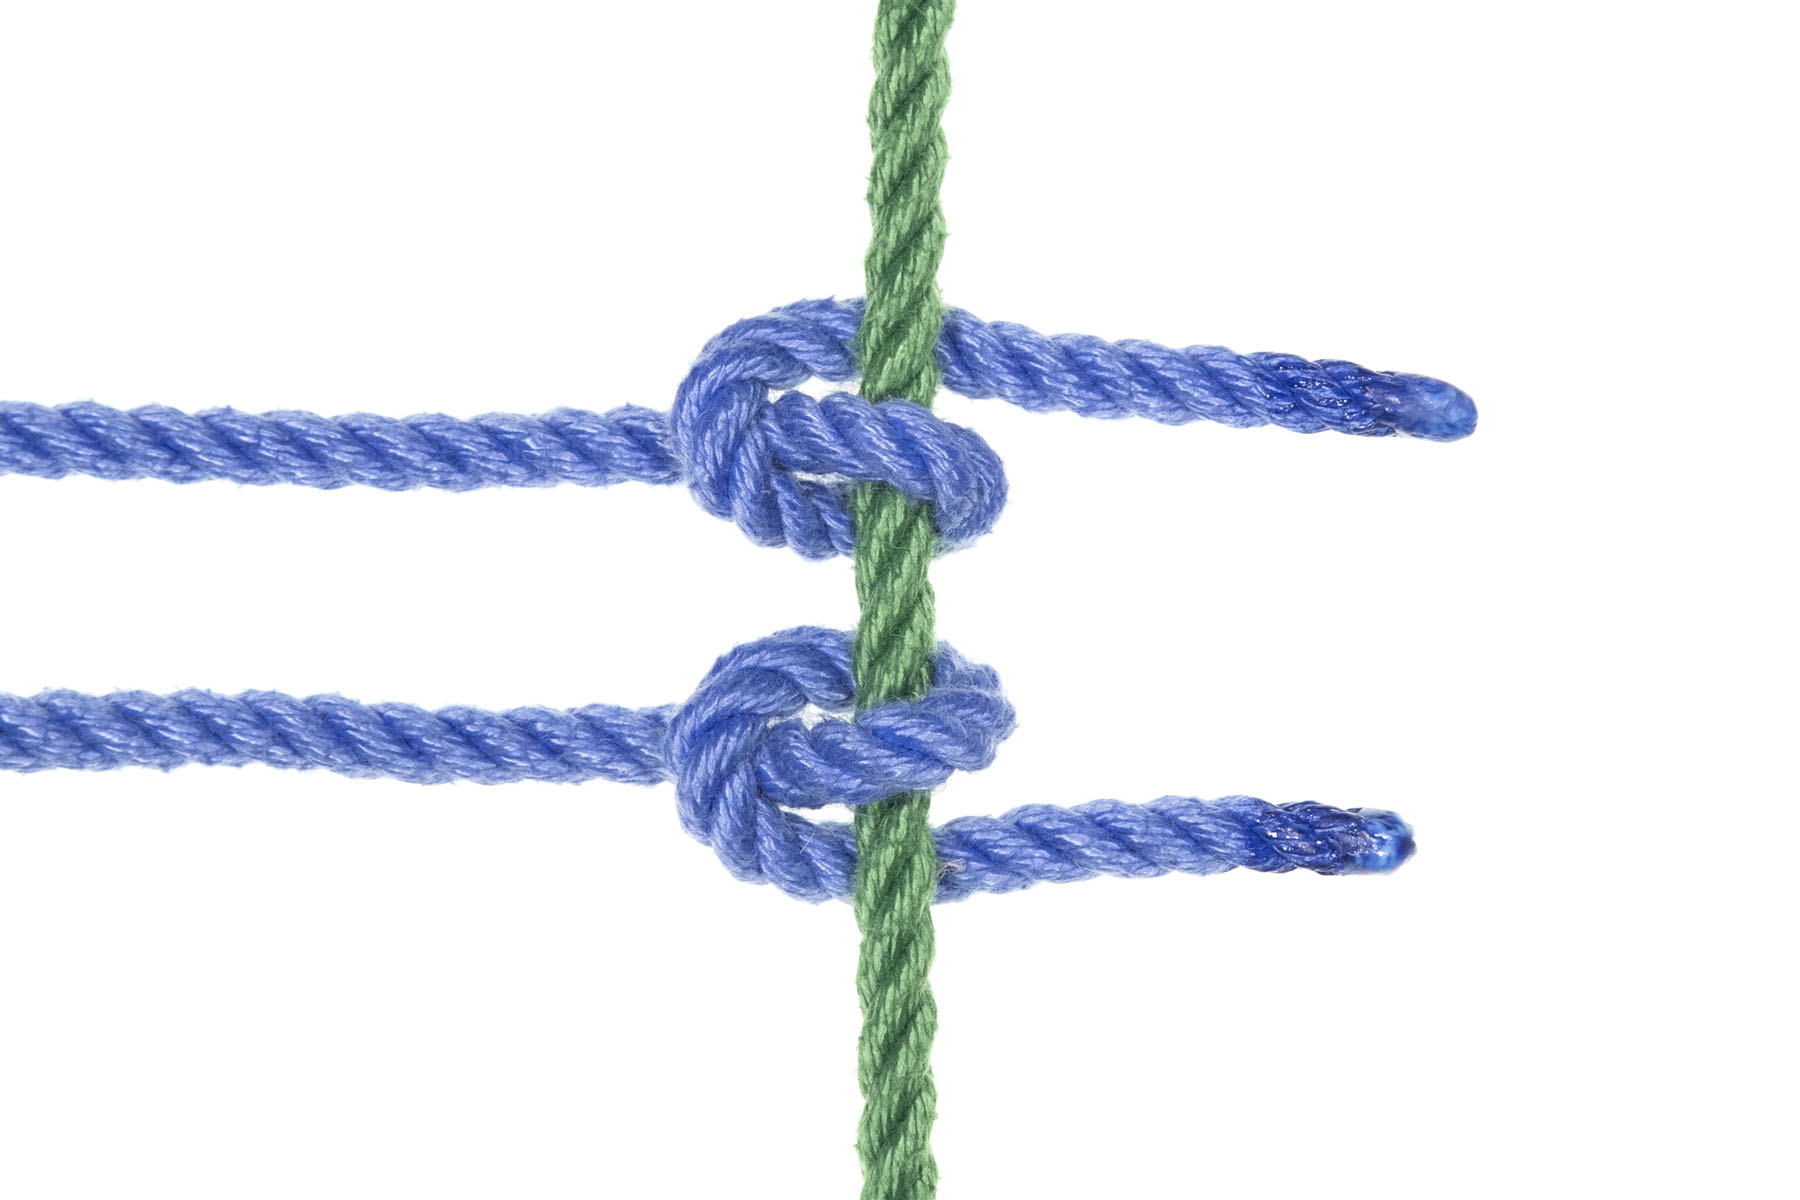 A green rope crosses the frame vertically. Two blue ropes enter from the left, make Munter frictions on the green rope, and exit to the right, both travelling horizontally. The upper Munter crosses itself moving upward, and the lower Munter crosses itself moving downward, making them mirror images of each other.